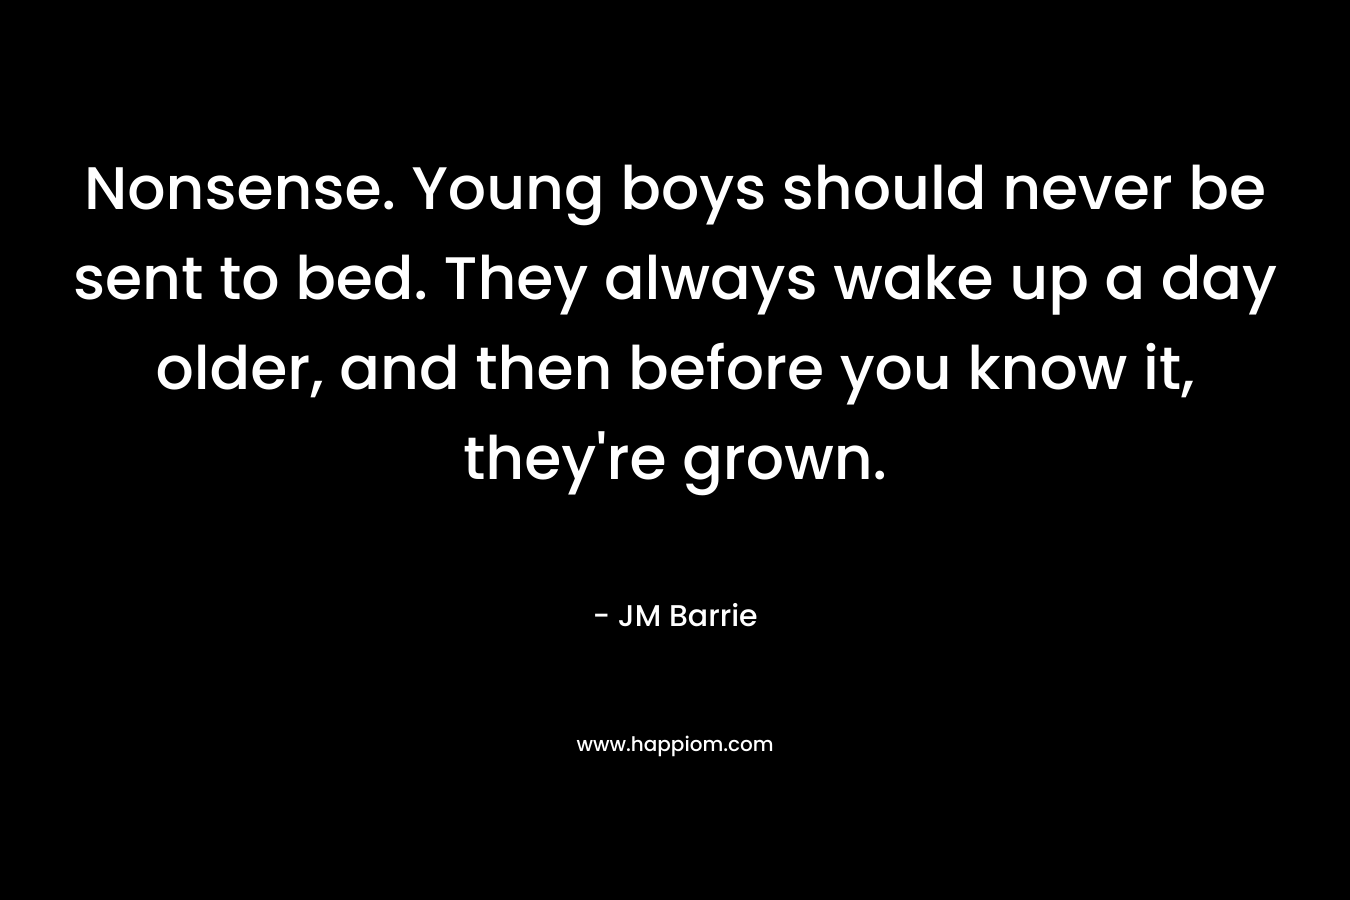 Nonsense. Young boys should never be sent to bed. They always wake up a day older, and then before you know it, they're grown.